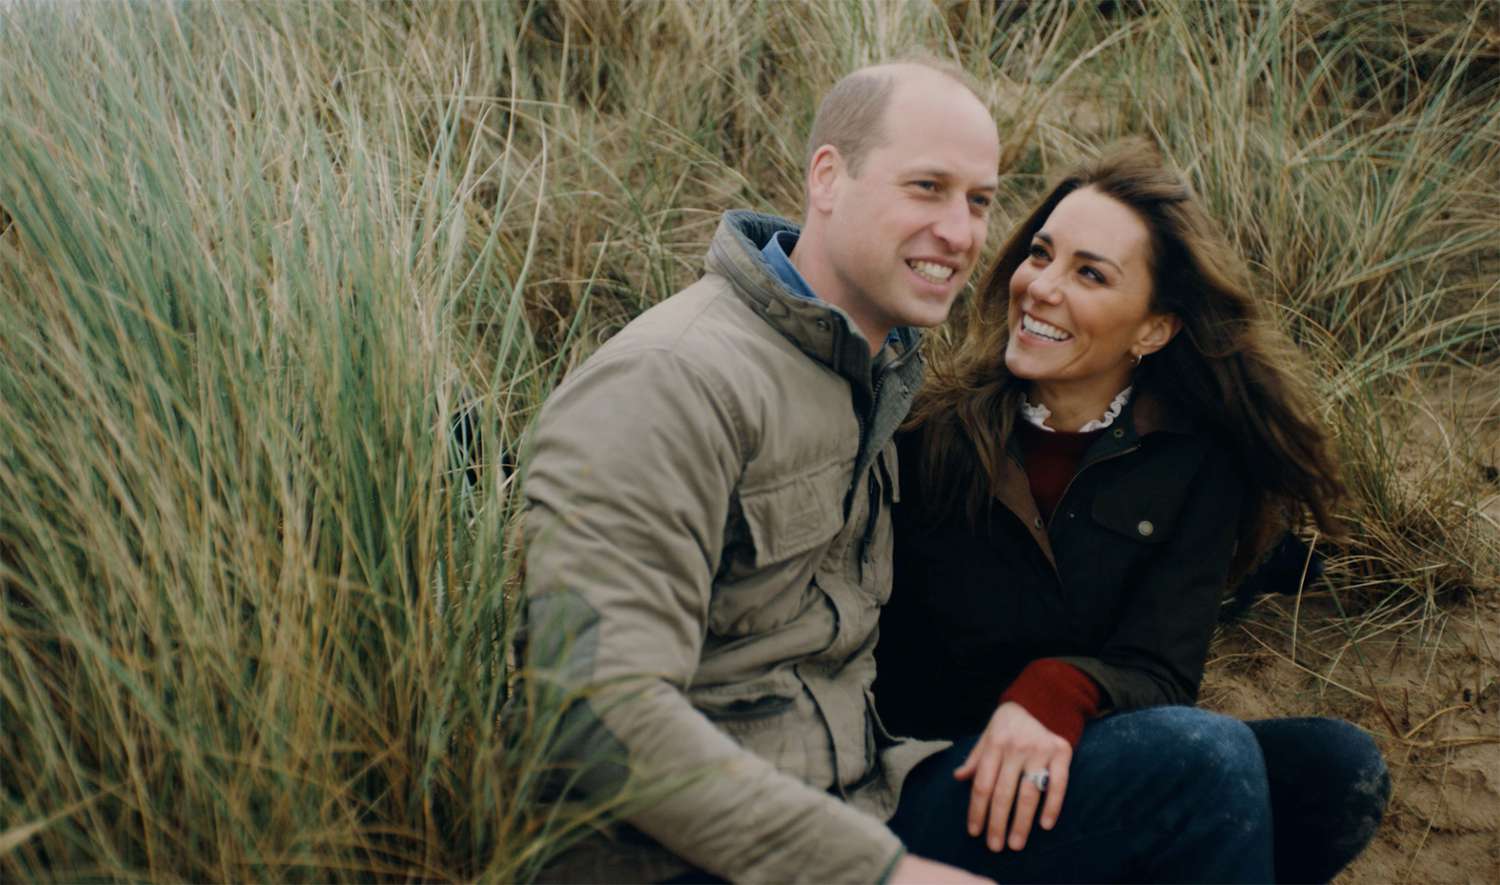 A new video clip has been shared on The Duke and Duchess of Cambridge’s @kensingtonroyal social media channels